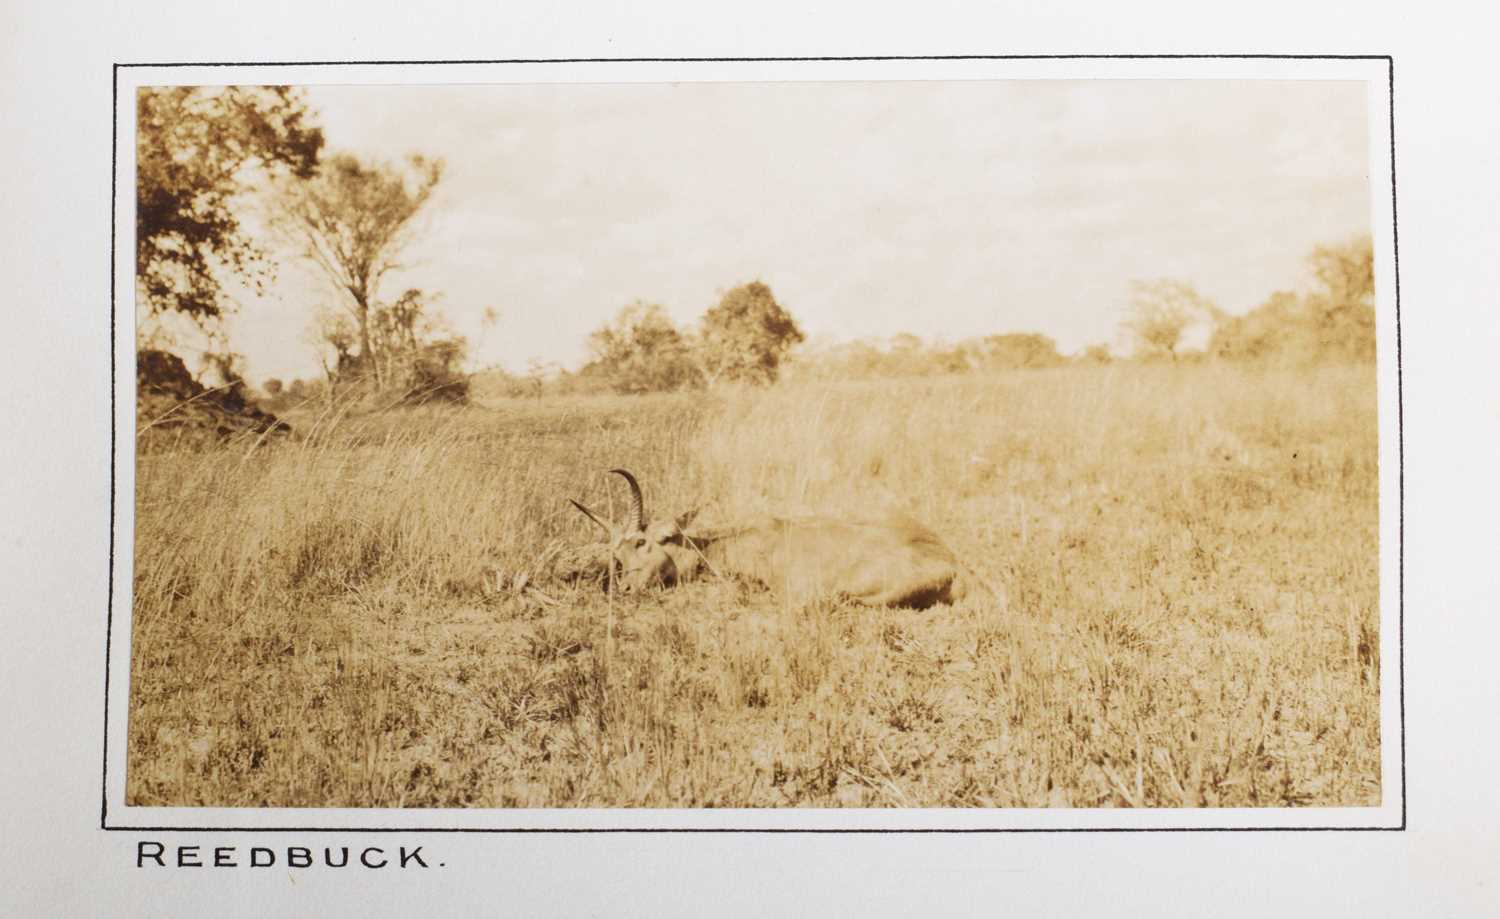 Taxidermy: Common Reedbuck (Redunca arundinum), dated 1920, Kafue, Zambia, by Rowland Ward Ltd, "The - Image 6 of 8